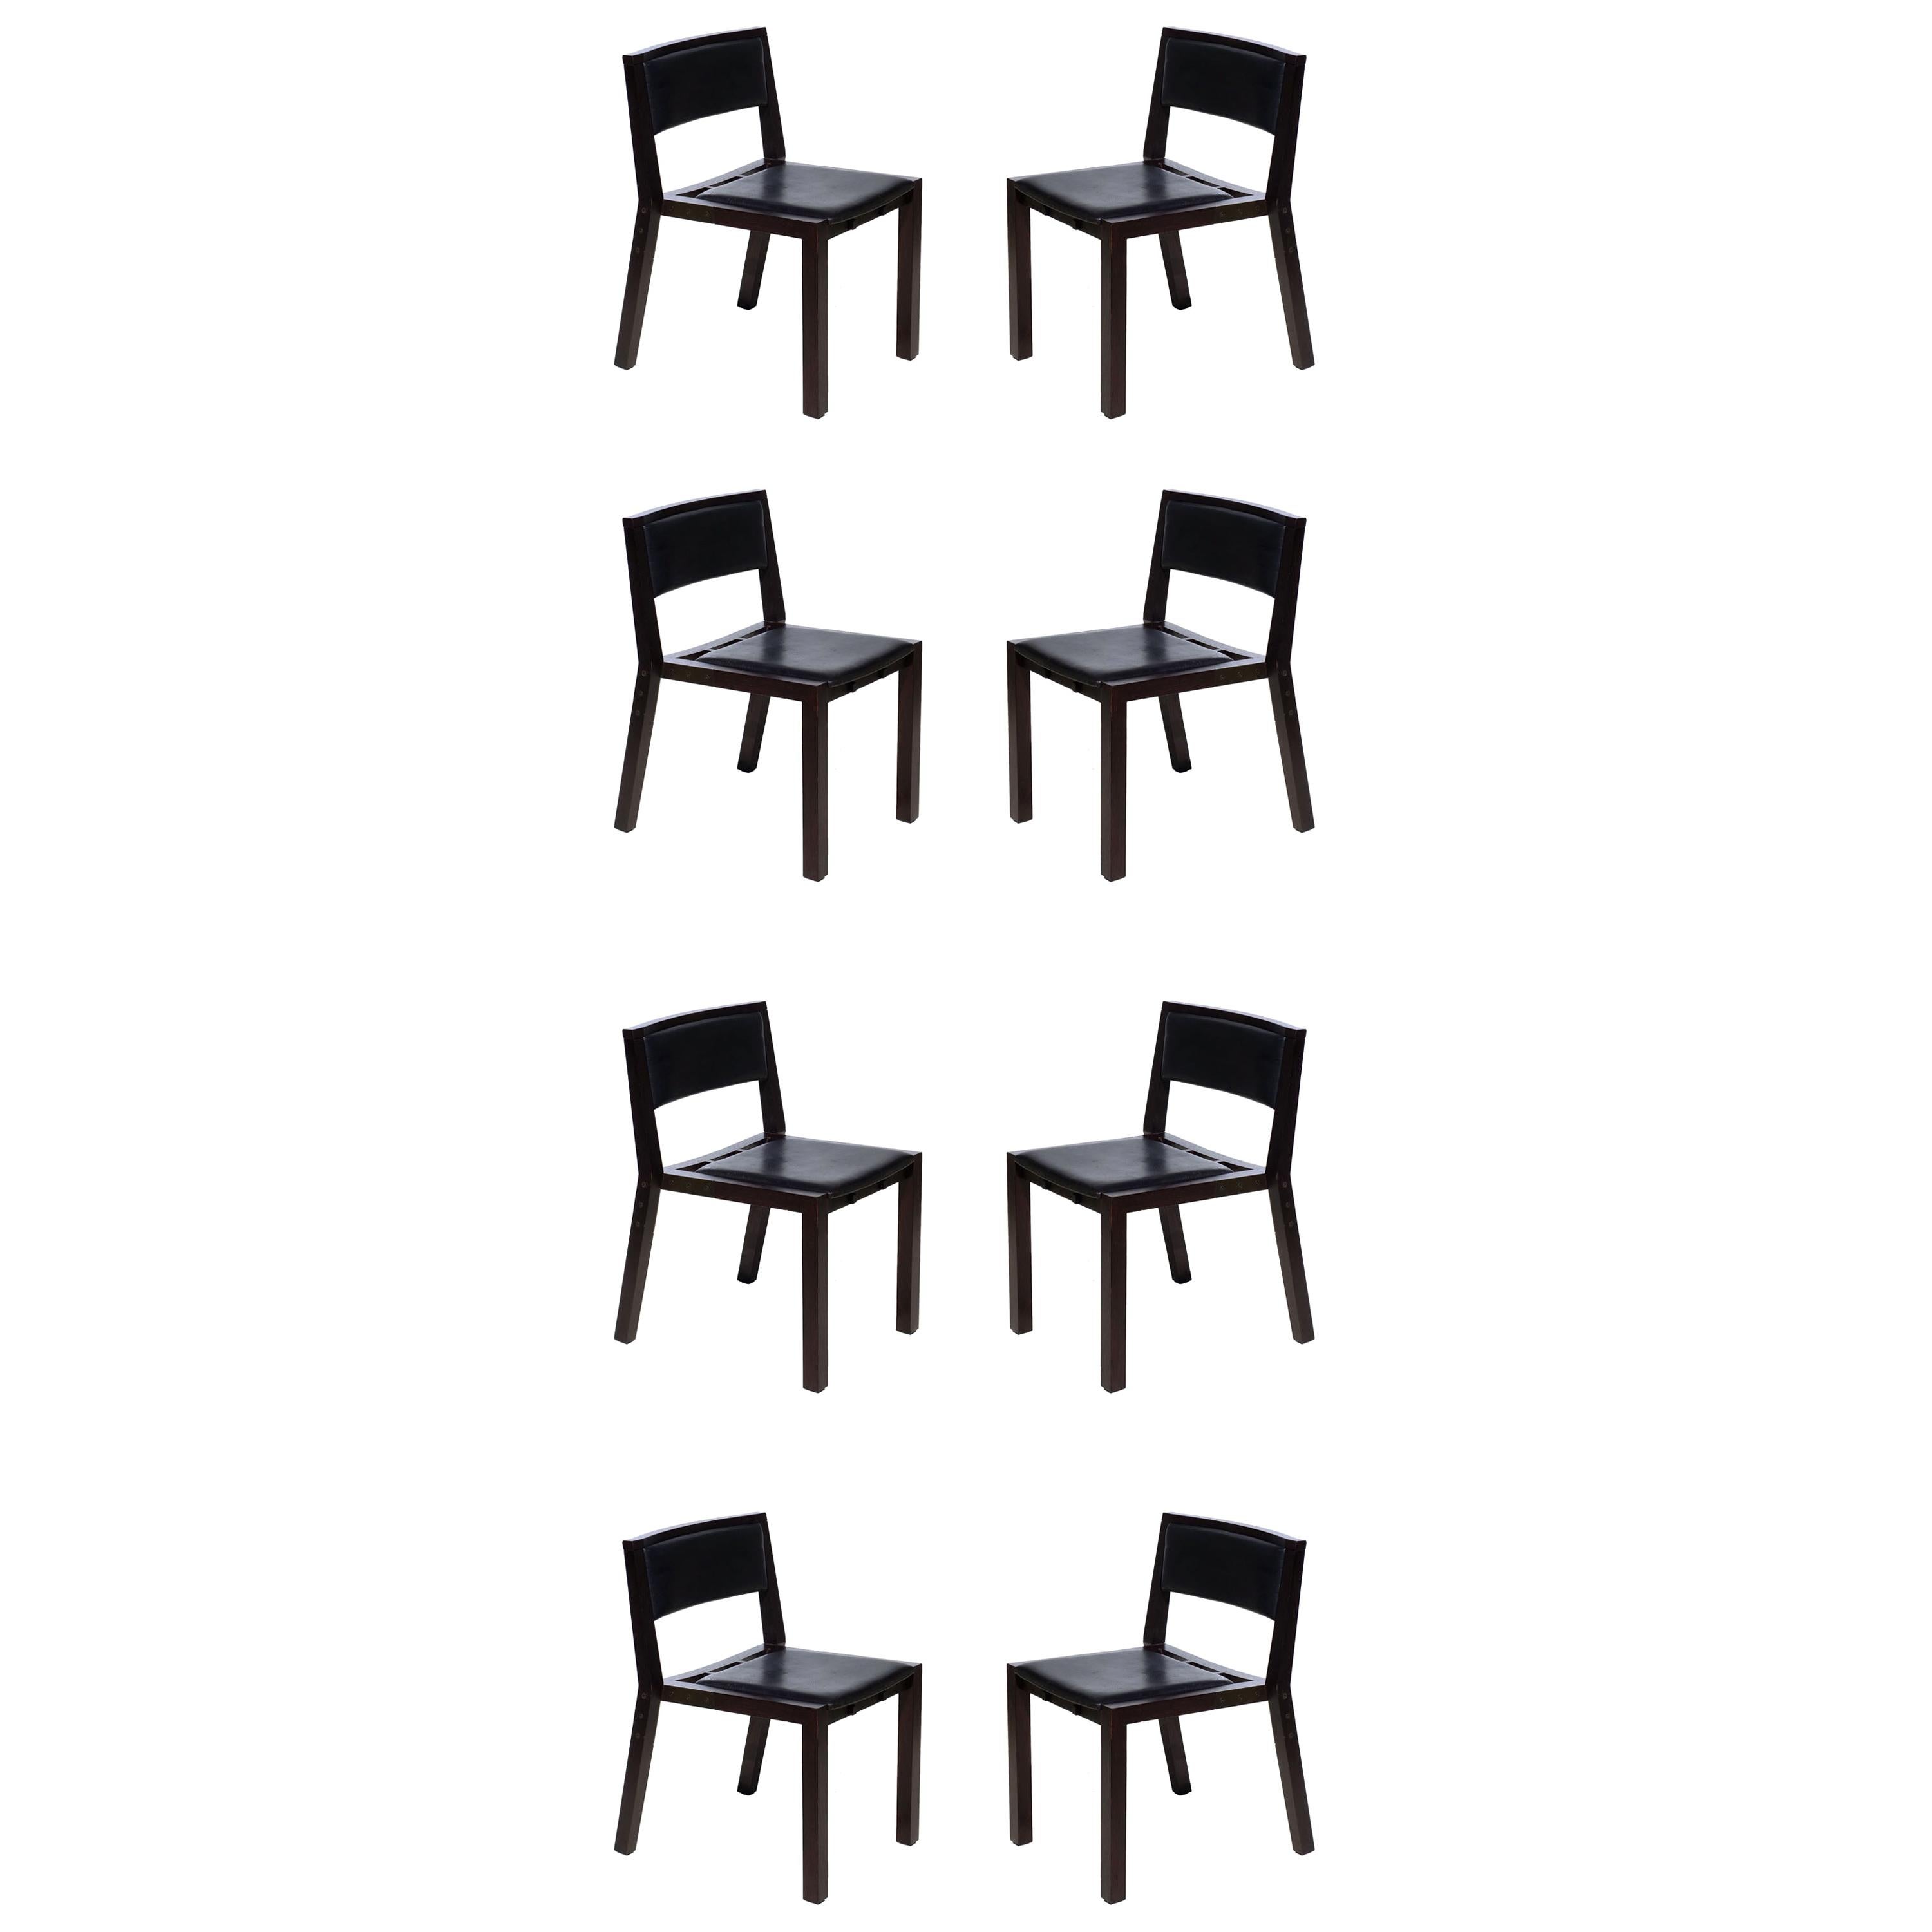 Grand Louvre Side Chair by Jean-Michel Wilmotte for Tecno, Set of 8